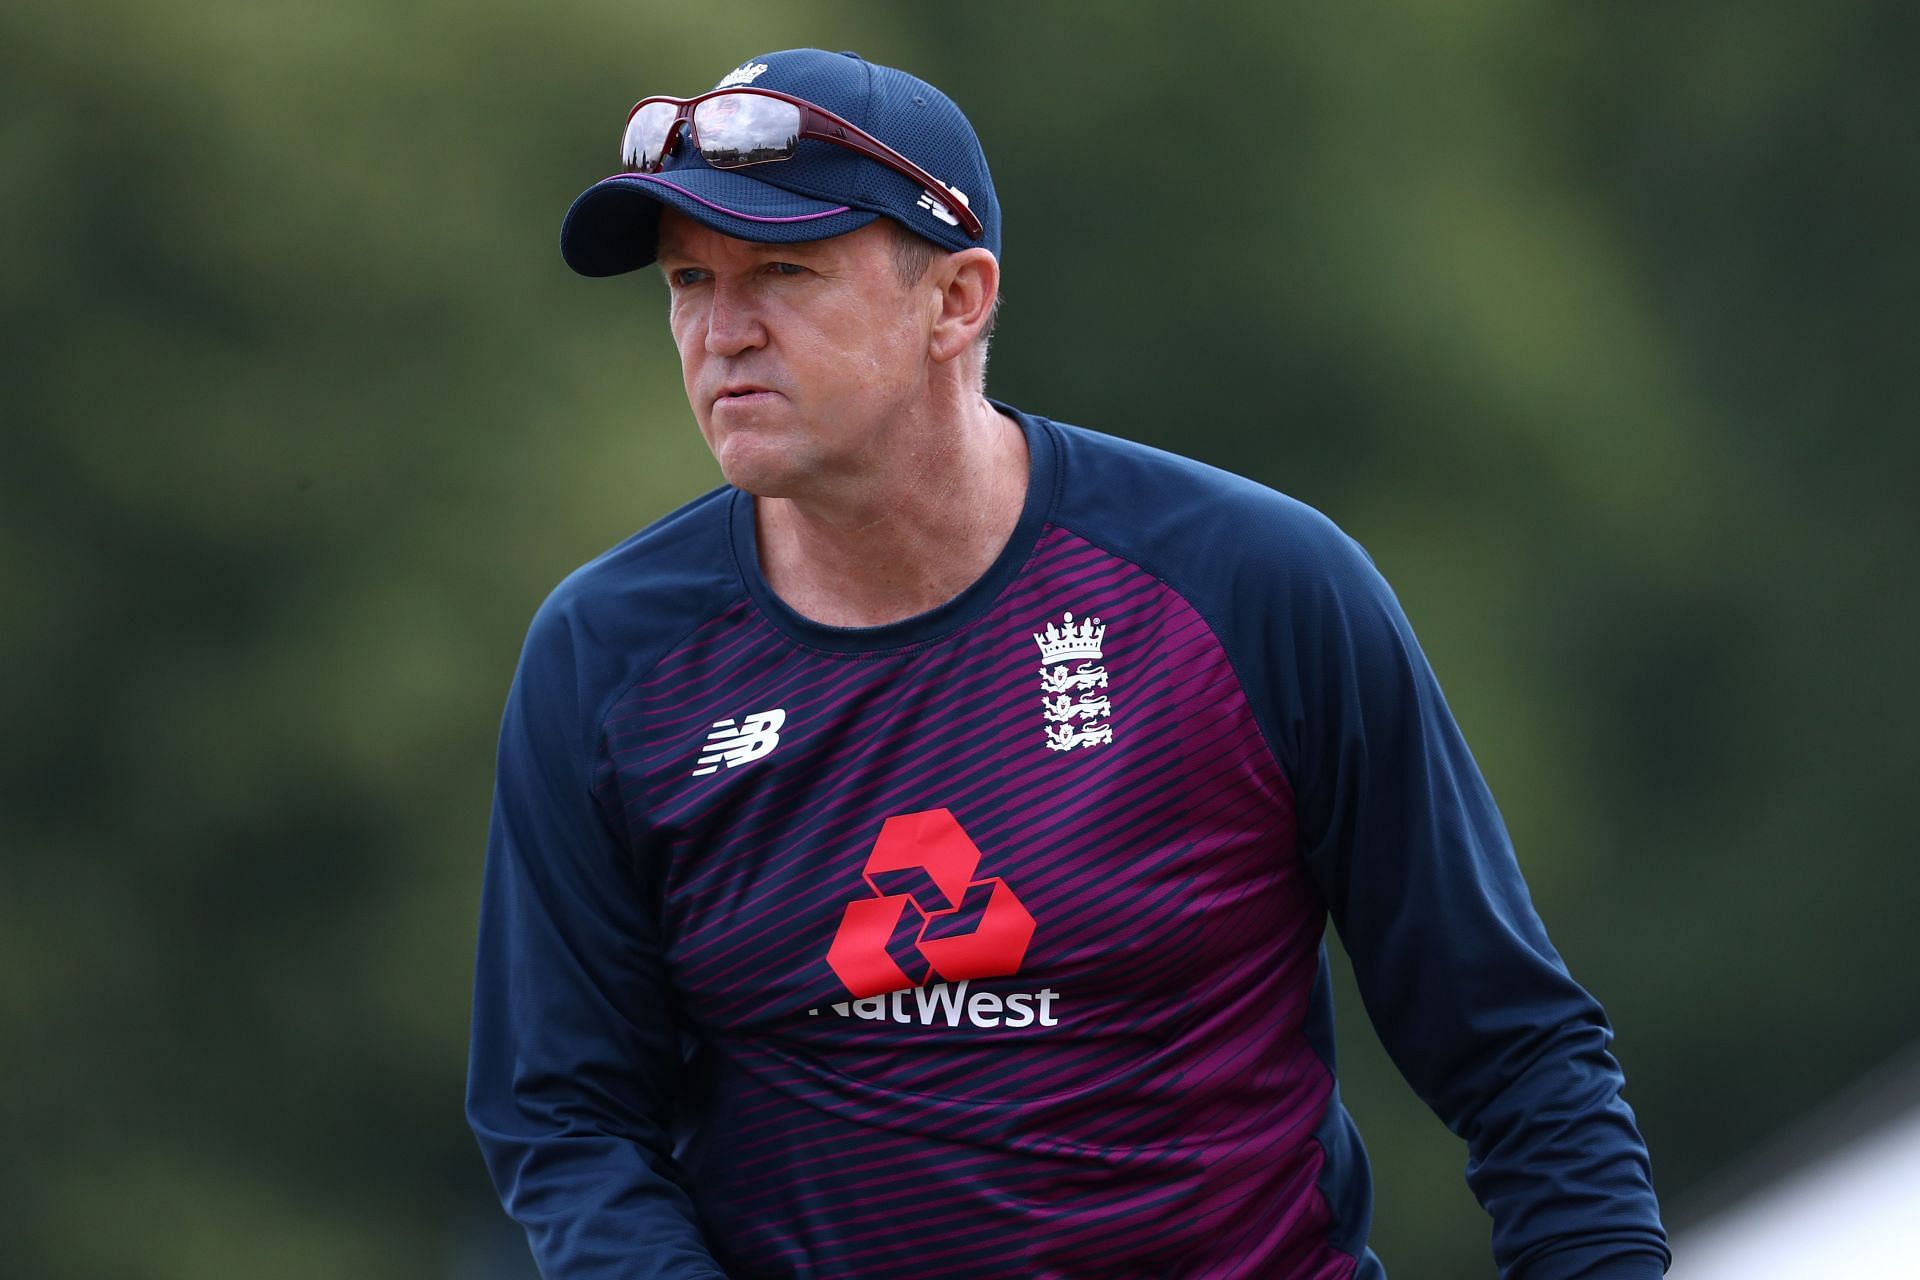 Andy Flower has worked with Rahul in the IPL